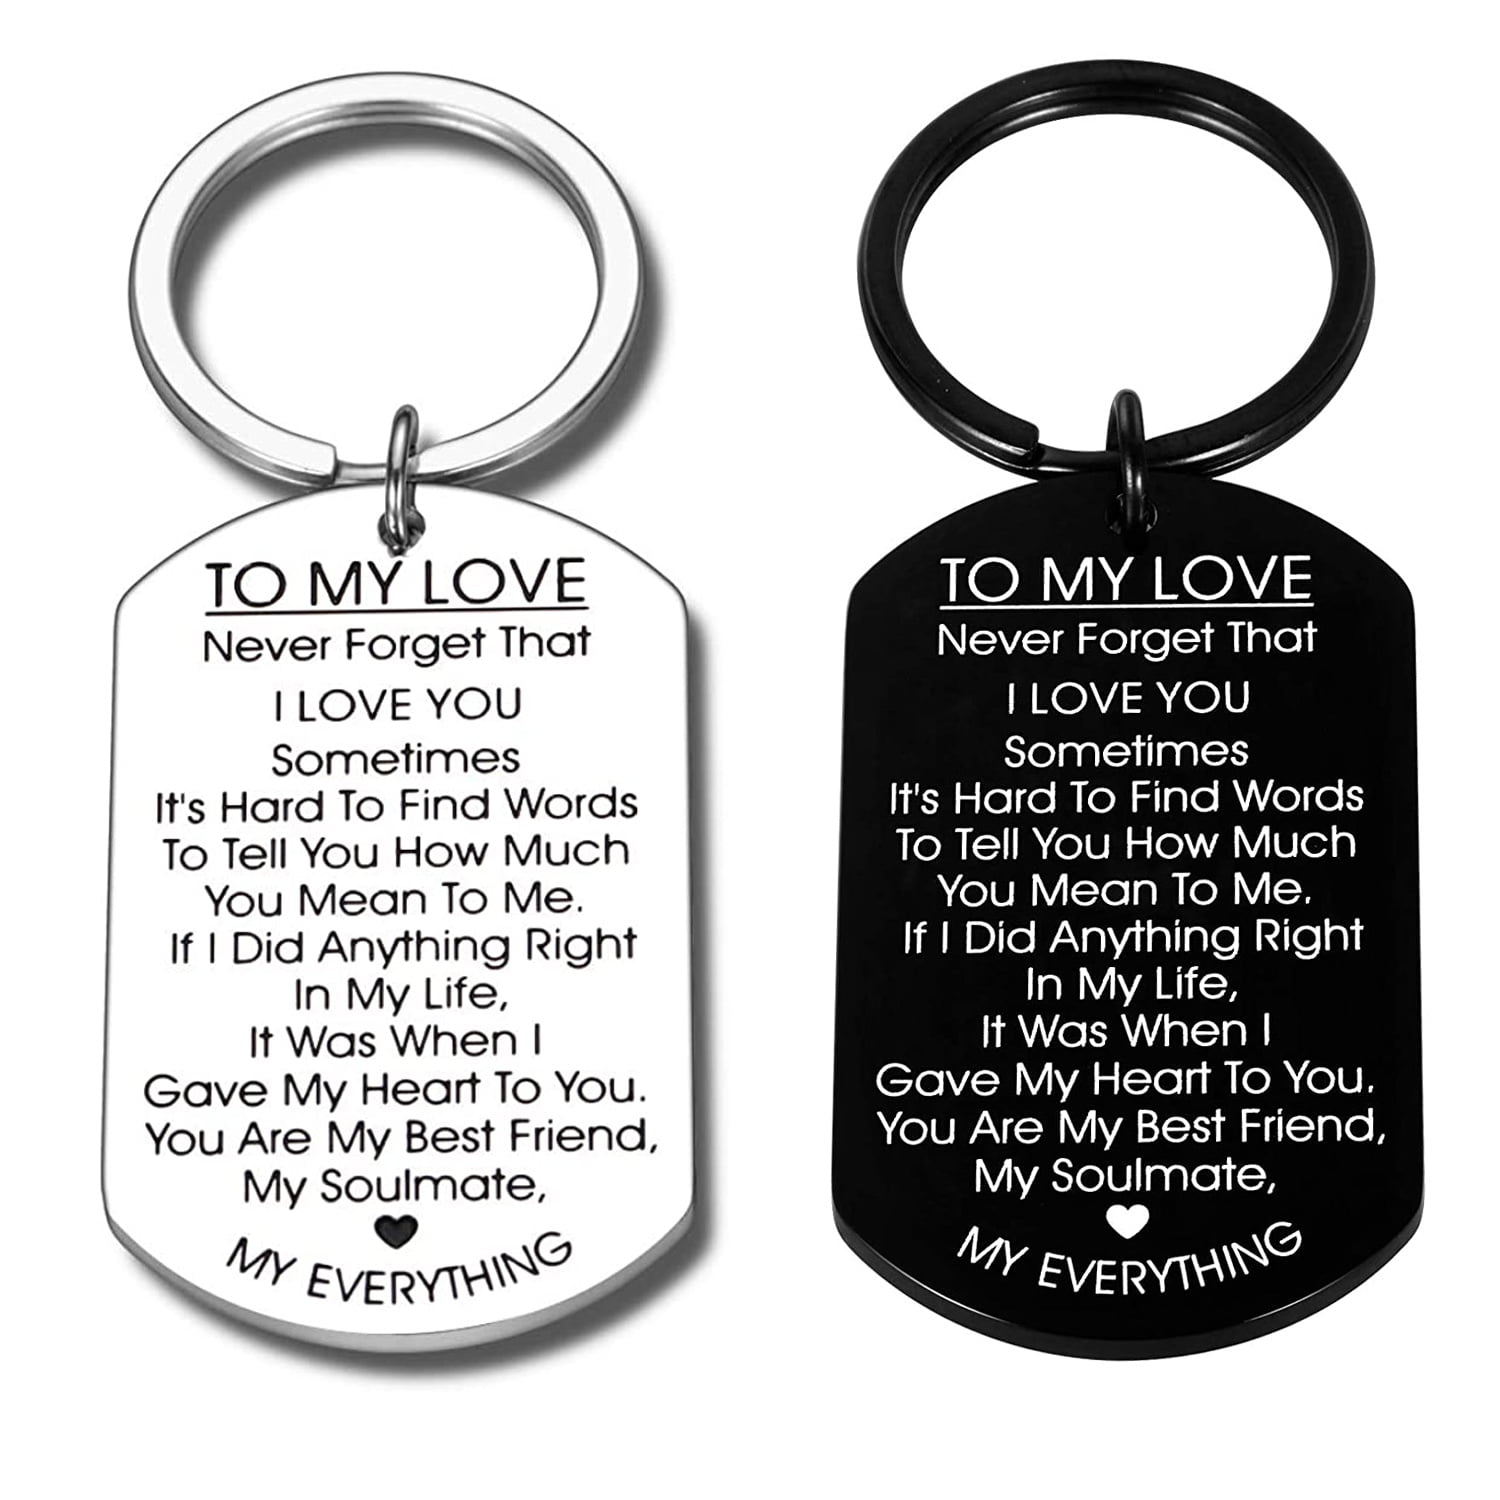 PERSONALISED KEYRING BEAUTY GYM WIFE VALENTINES LOVE HUSBAND GIFT COUPLE CUTE 